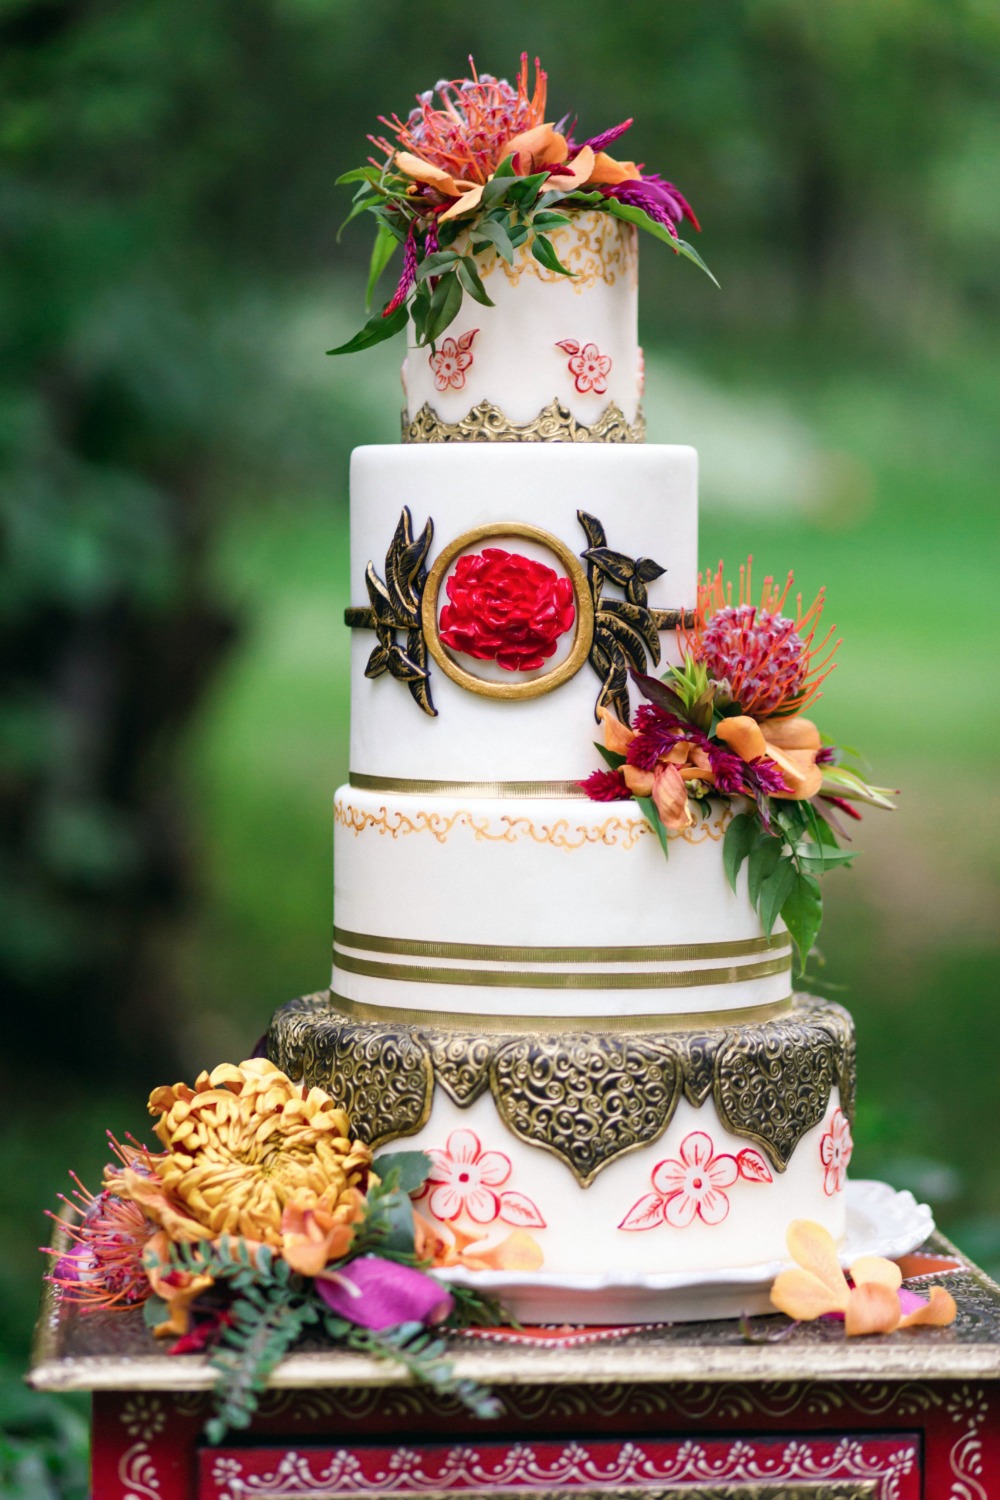 Unique and colorful wedding cake